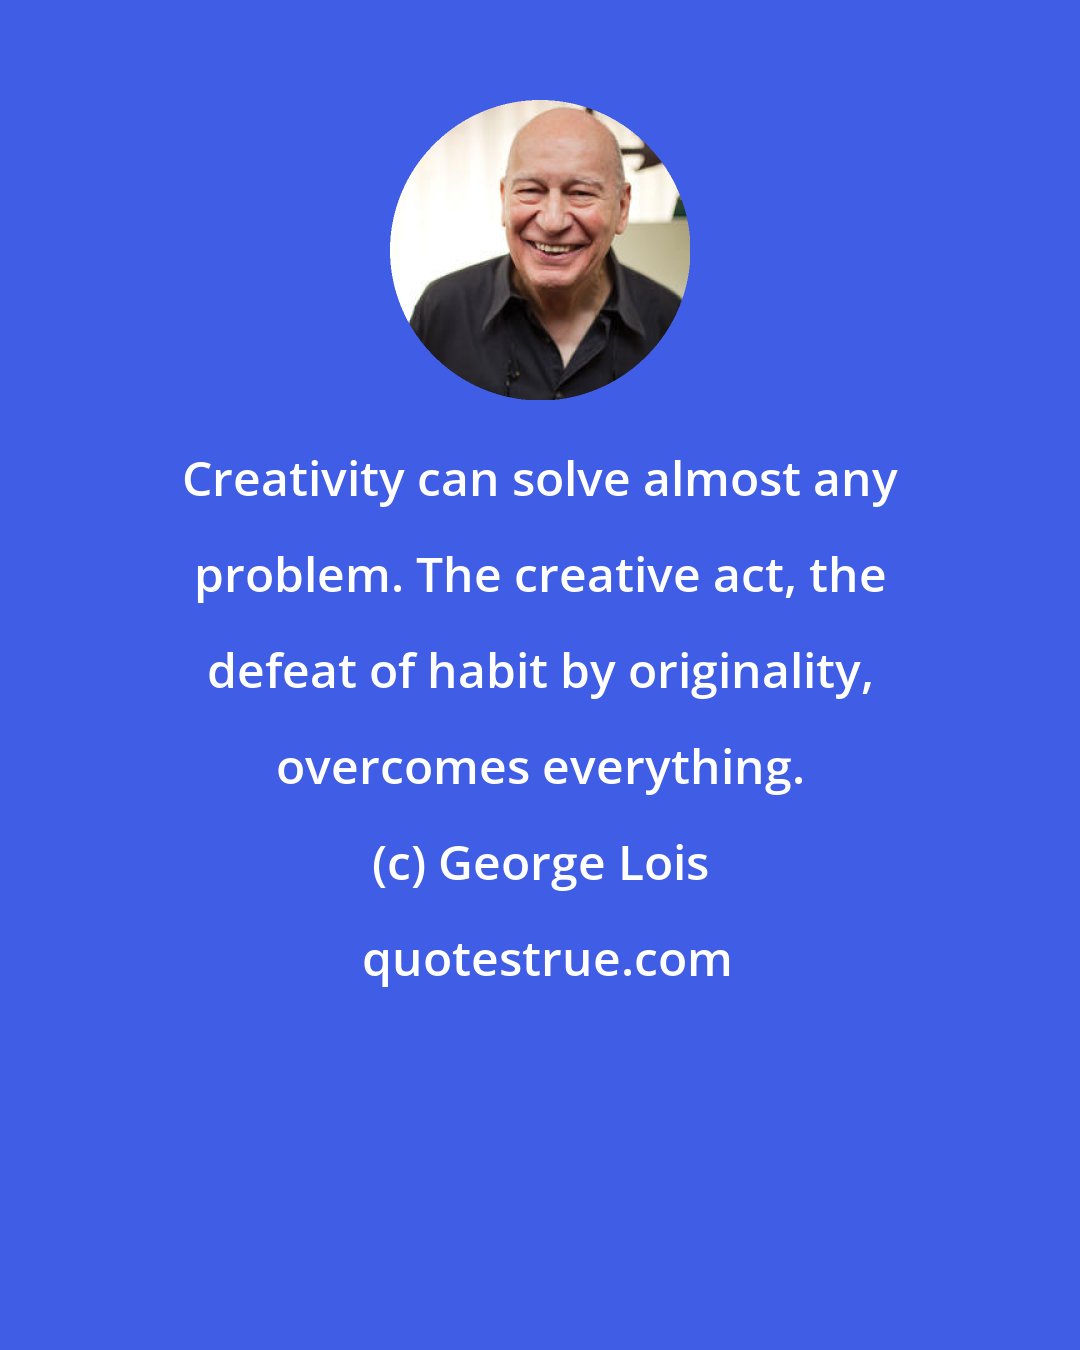 George Lois: Creativity can solve almost any problem. The creative act, the defeat of habit by originality, overcomes everything.